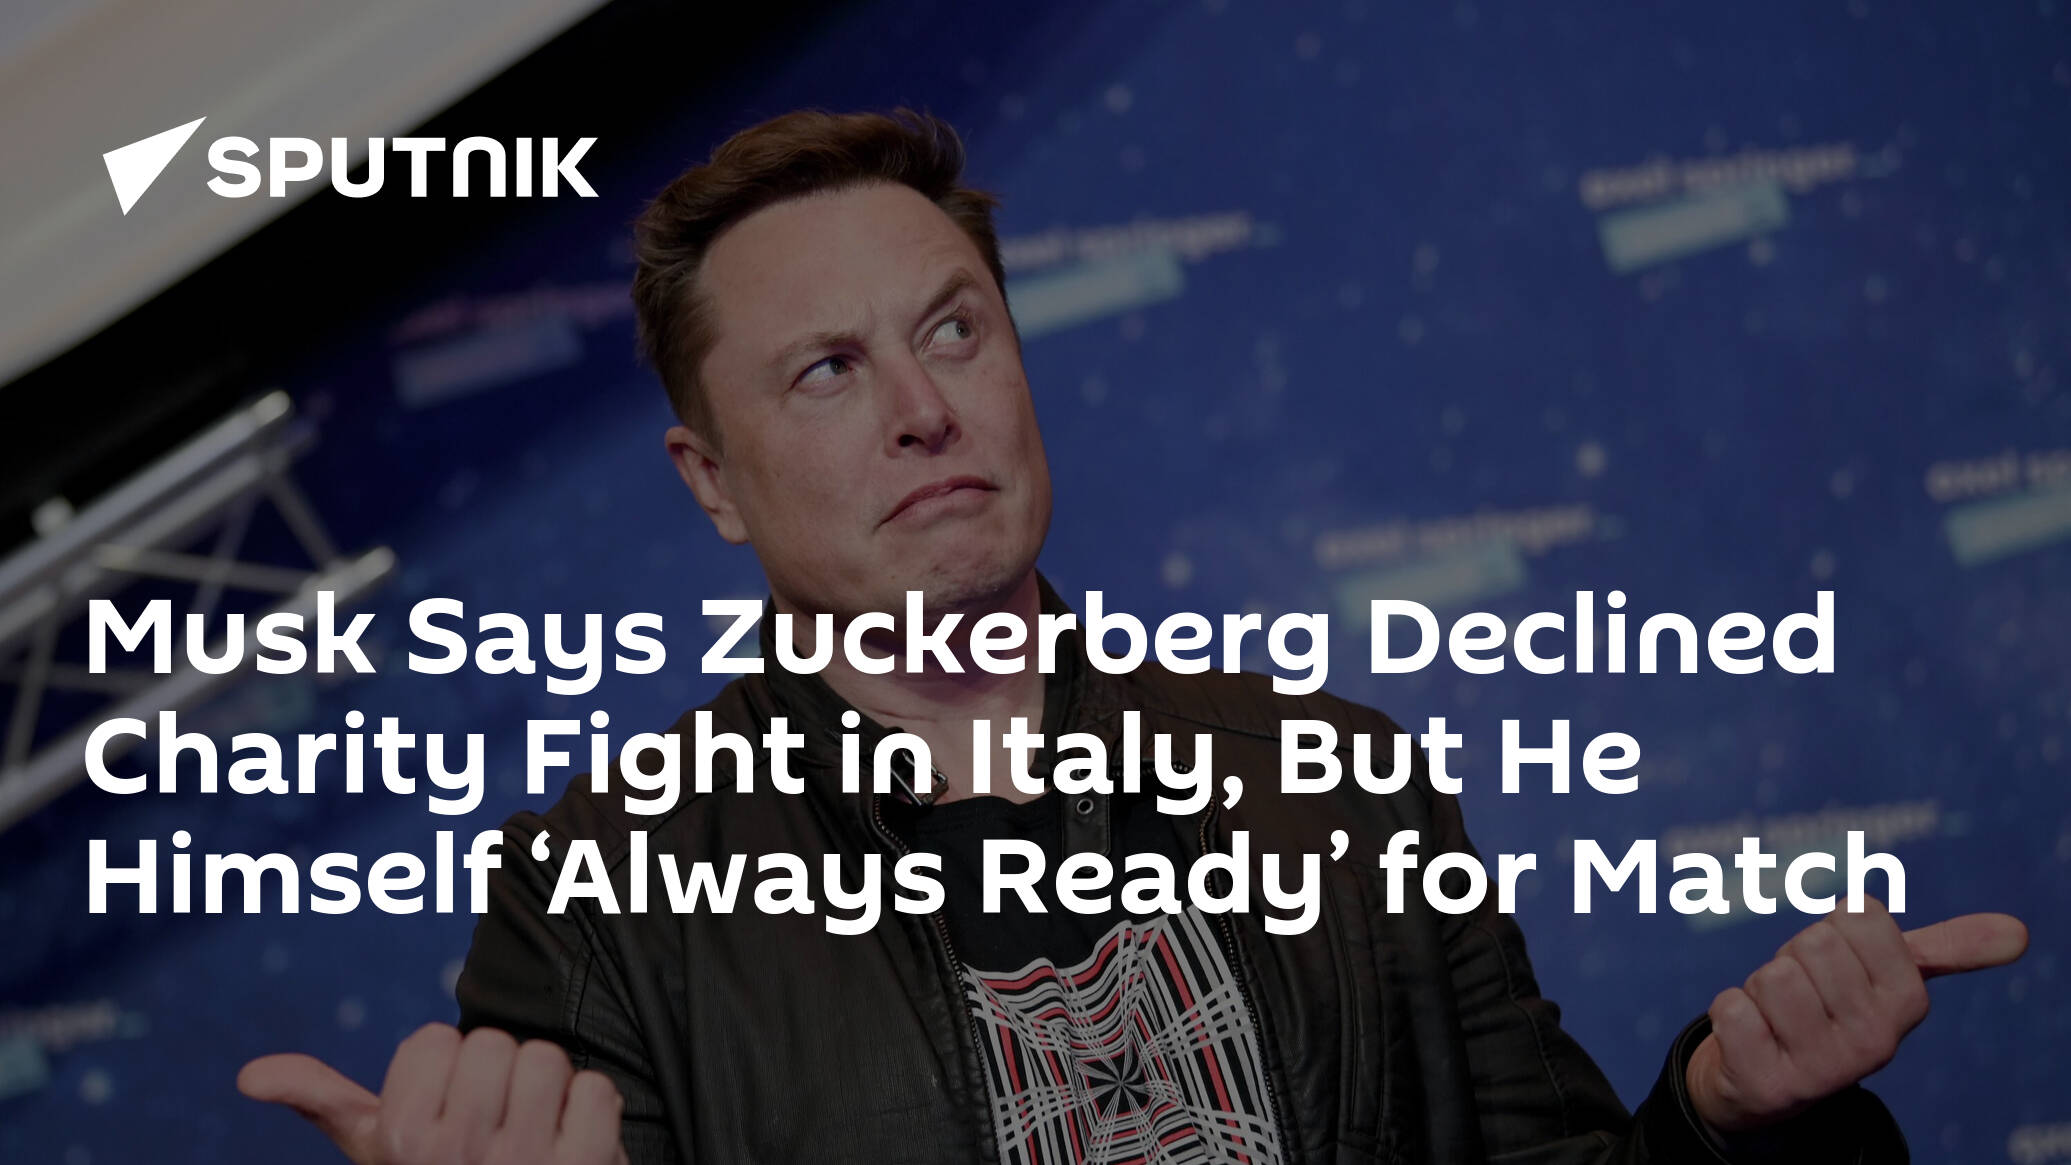 Musk Says Zuckerberg Declined Charity Fight in Italy, But He Himself ‘Always Ready’ for Match